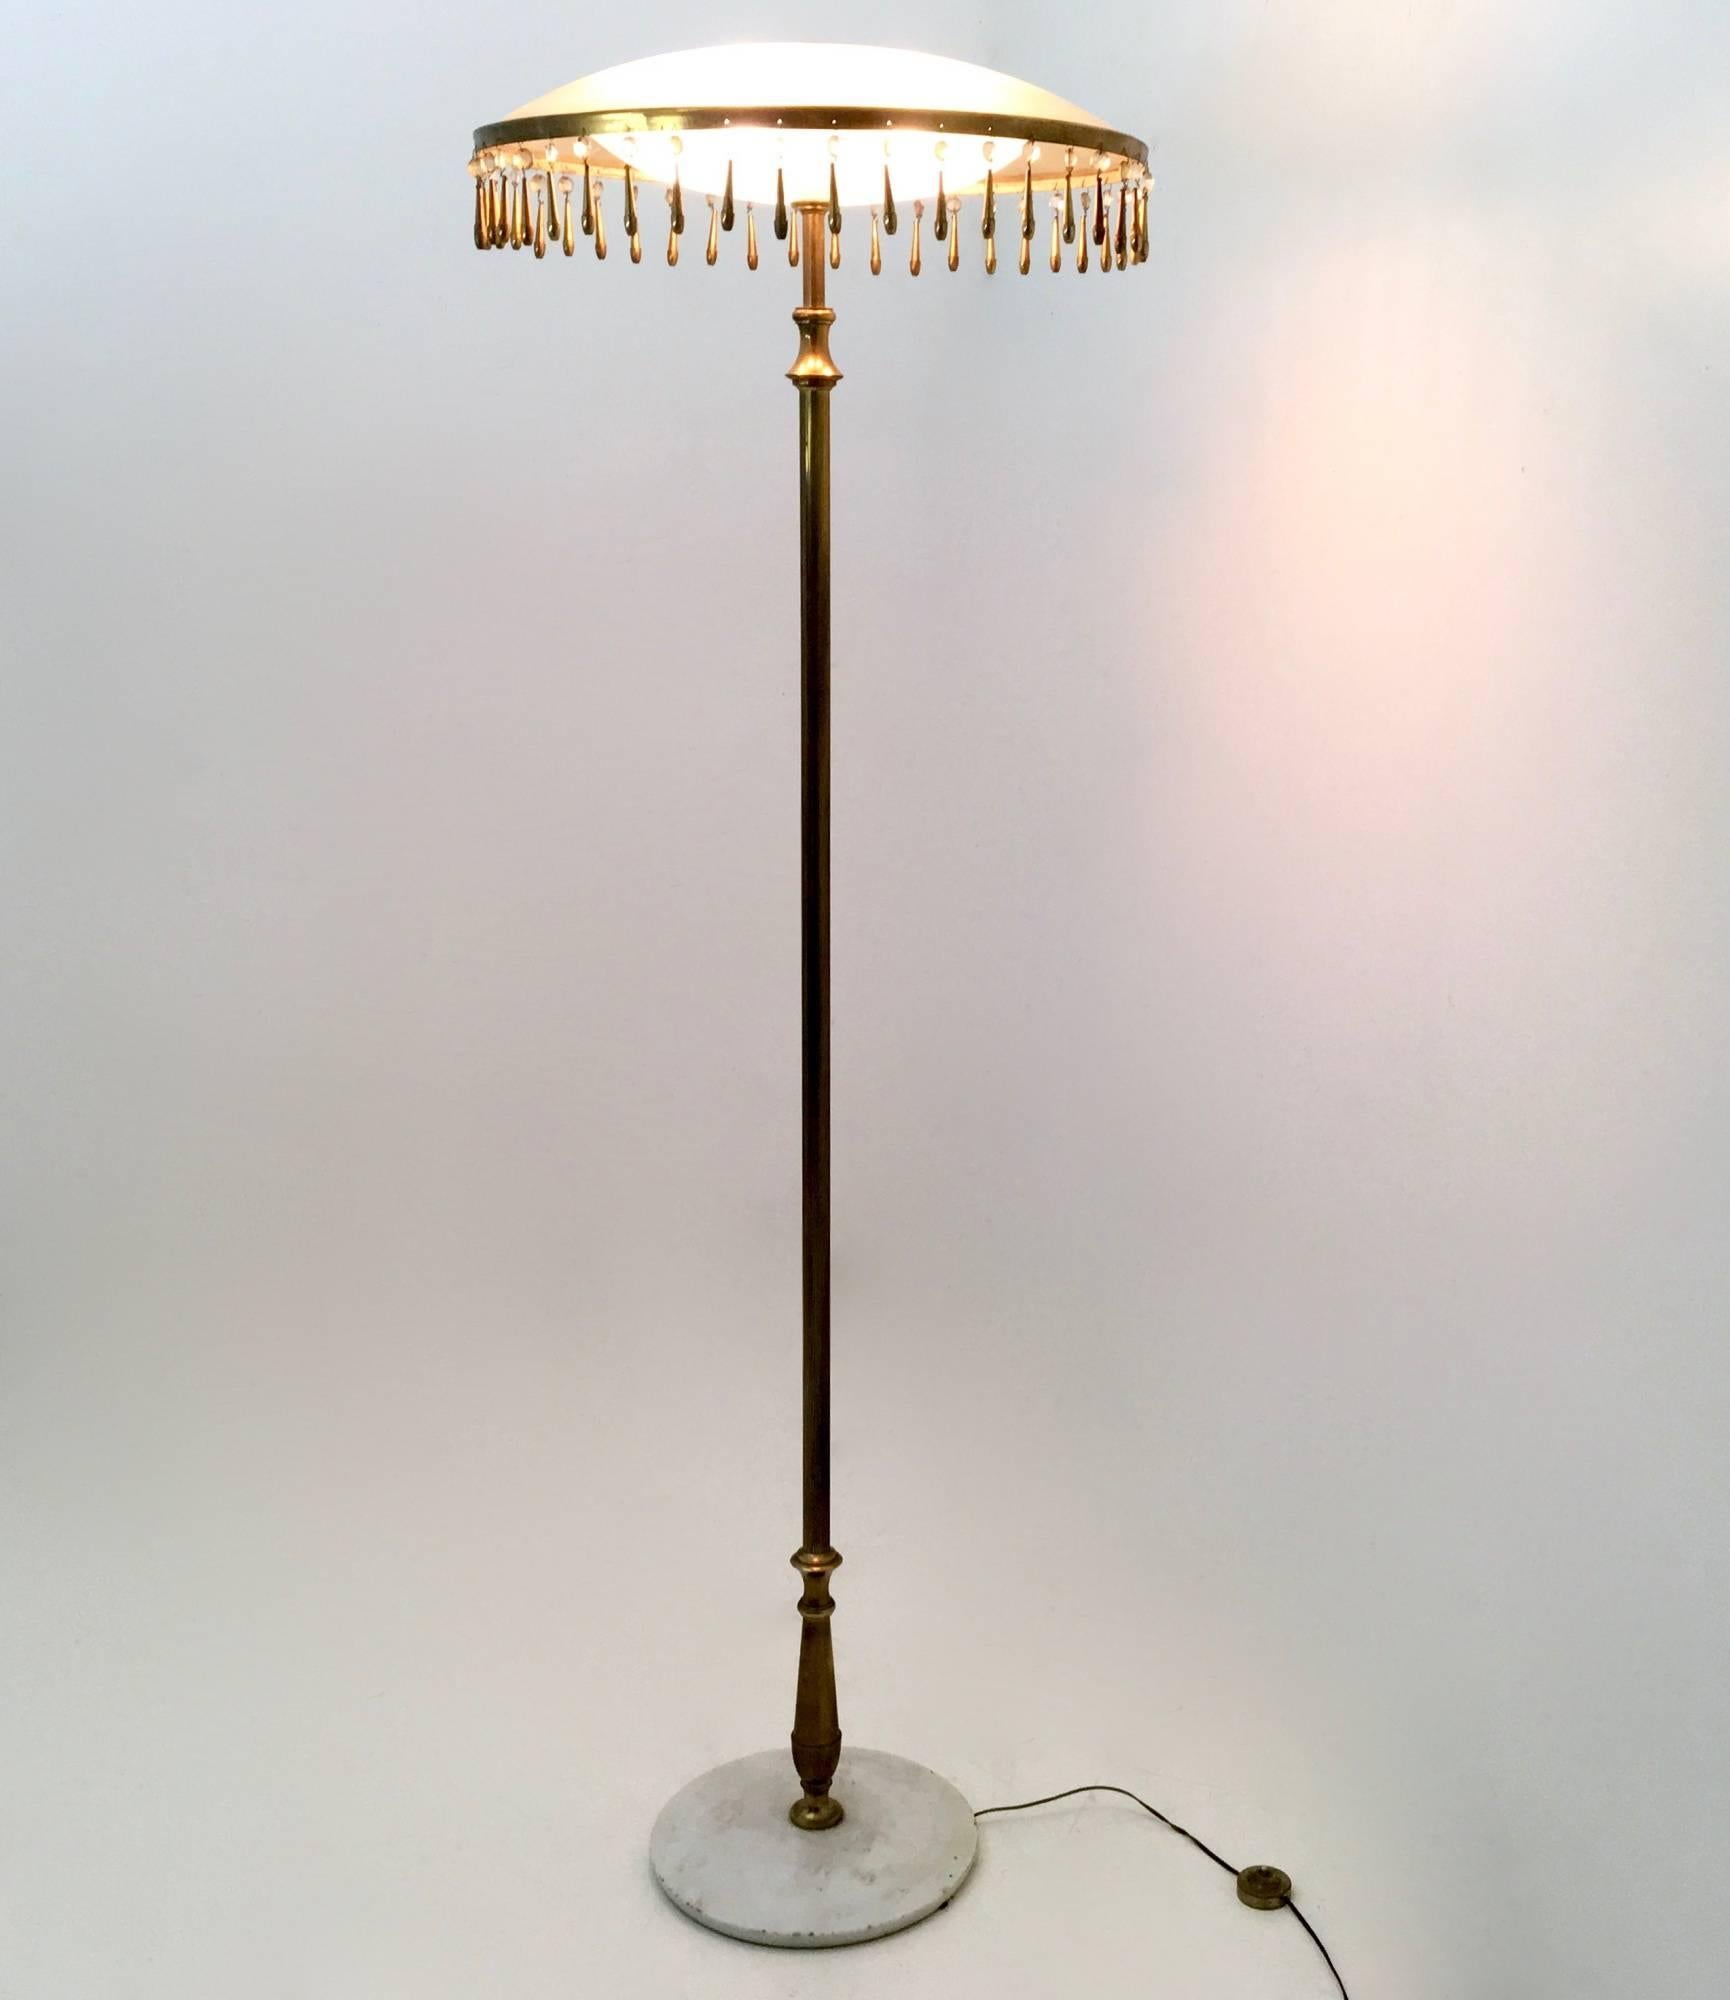 1955
This floor lamp features a marble base, a polished brass structure and duplex white opal and frosted glass diffusers.
Its rings is decorated with glass and brass pendants.
It may show slight traces of use, but there aren't any missing parts or